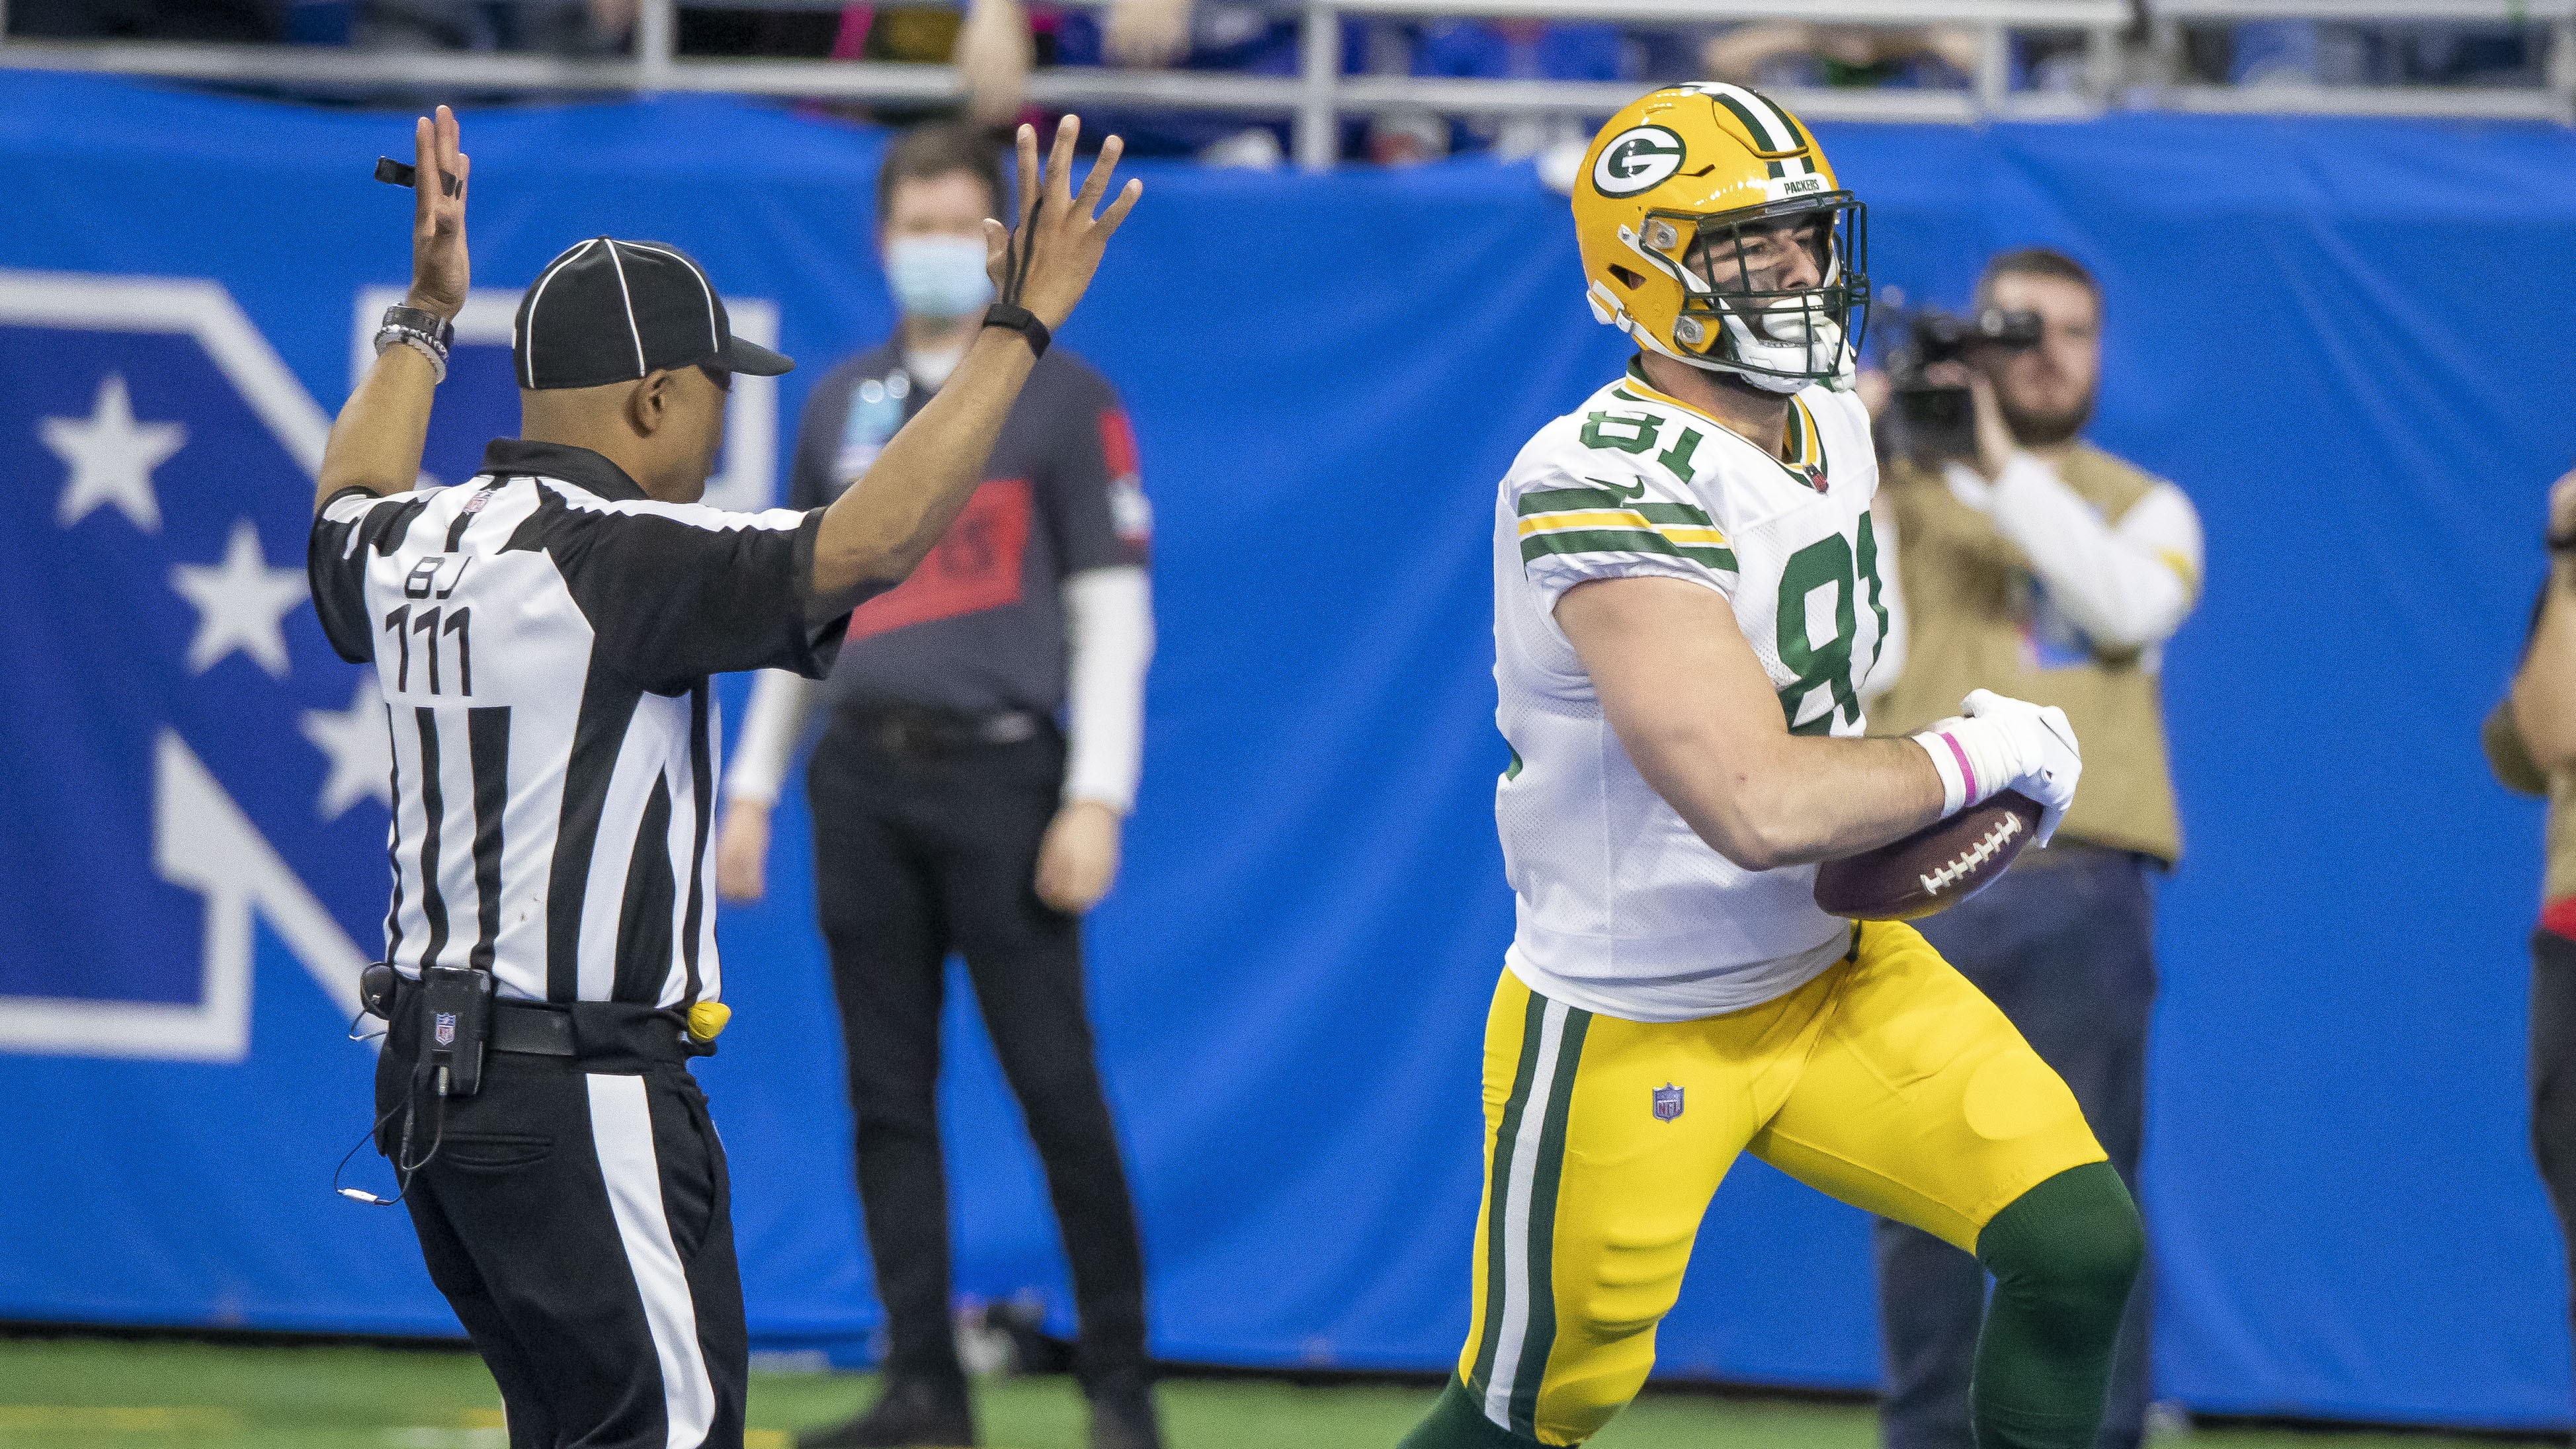 Packers vs Vikings: TV channel, live stream, radio, spread for betting